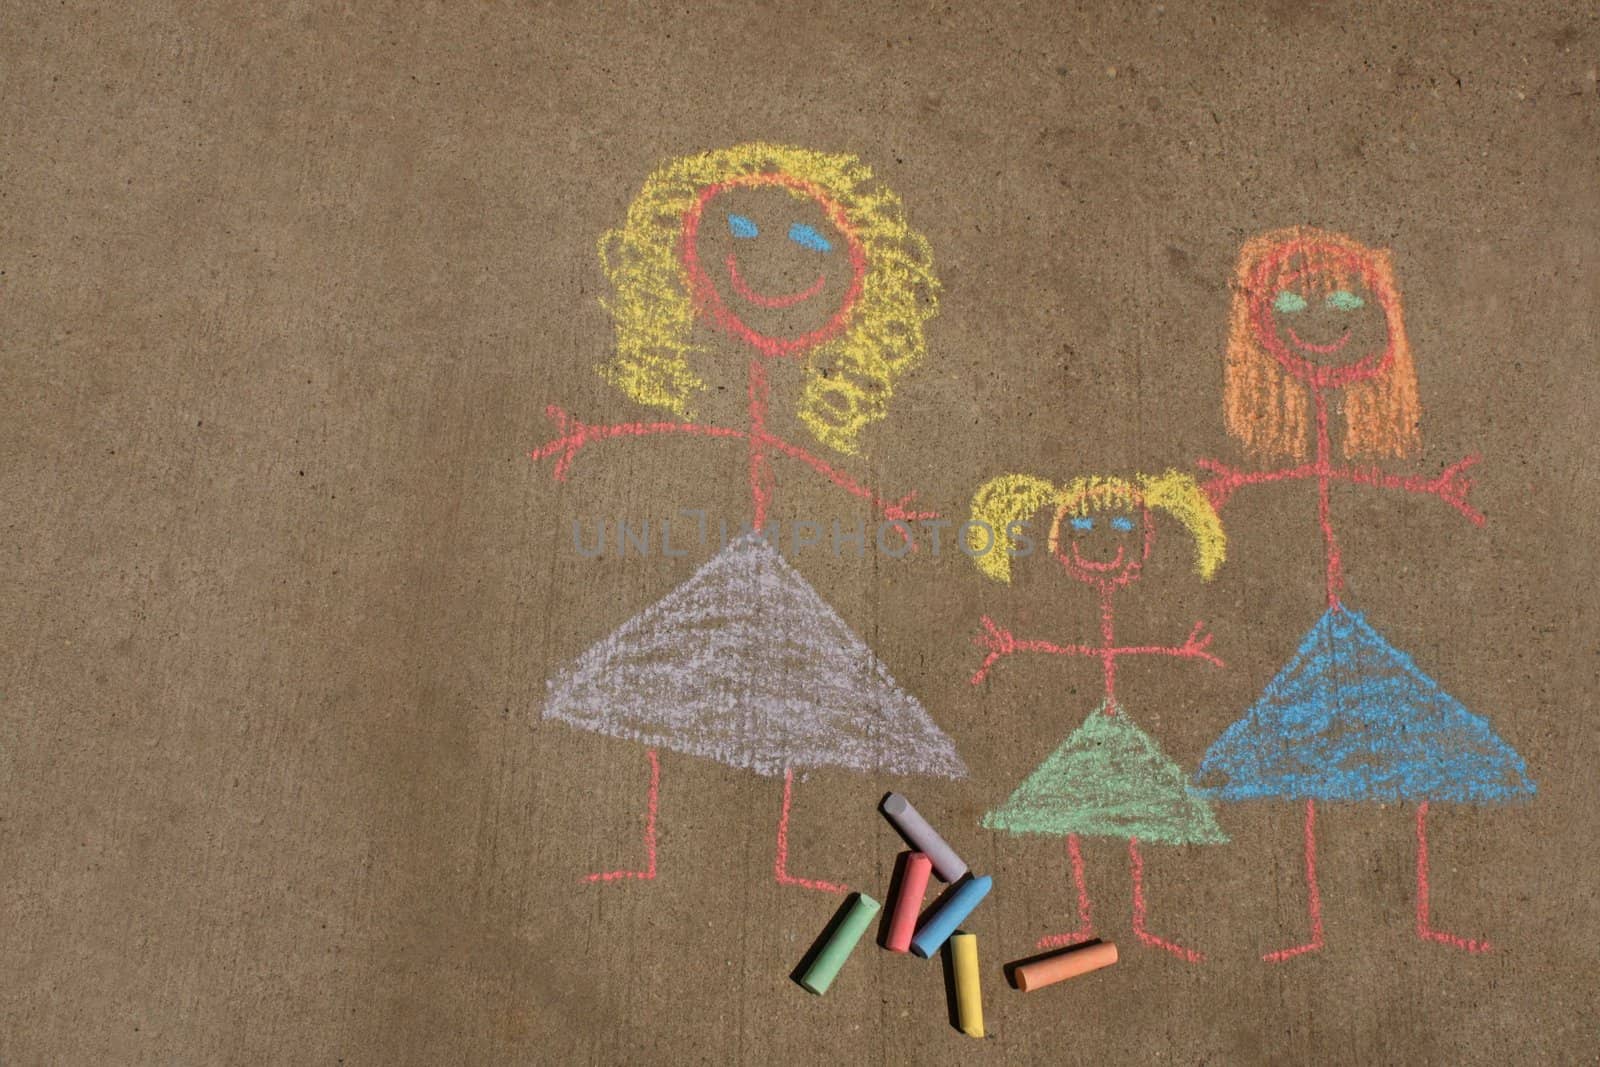 Concept image for gay parenting or gay marriage; a chalk child's drawing on a sidewalk or driveway, of two women and a female child.